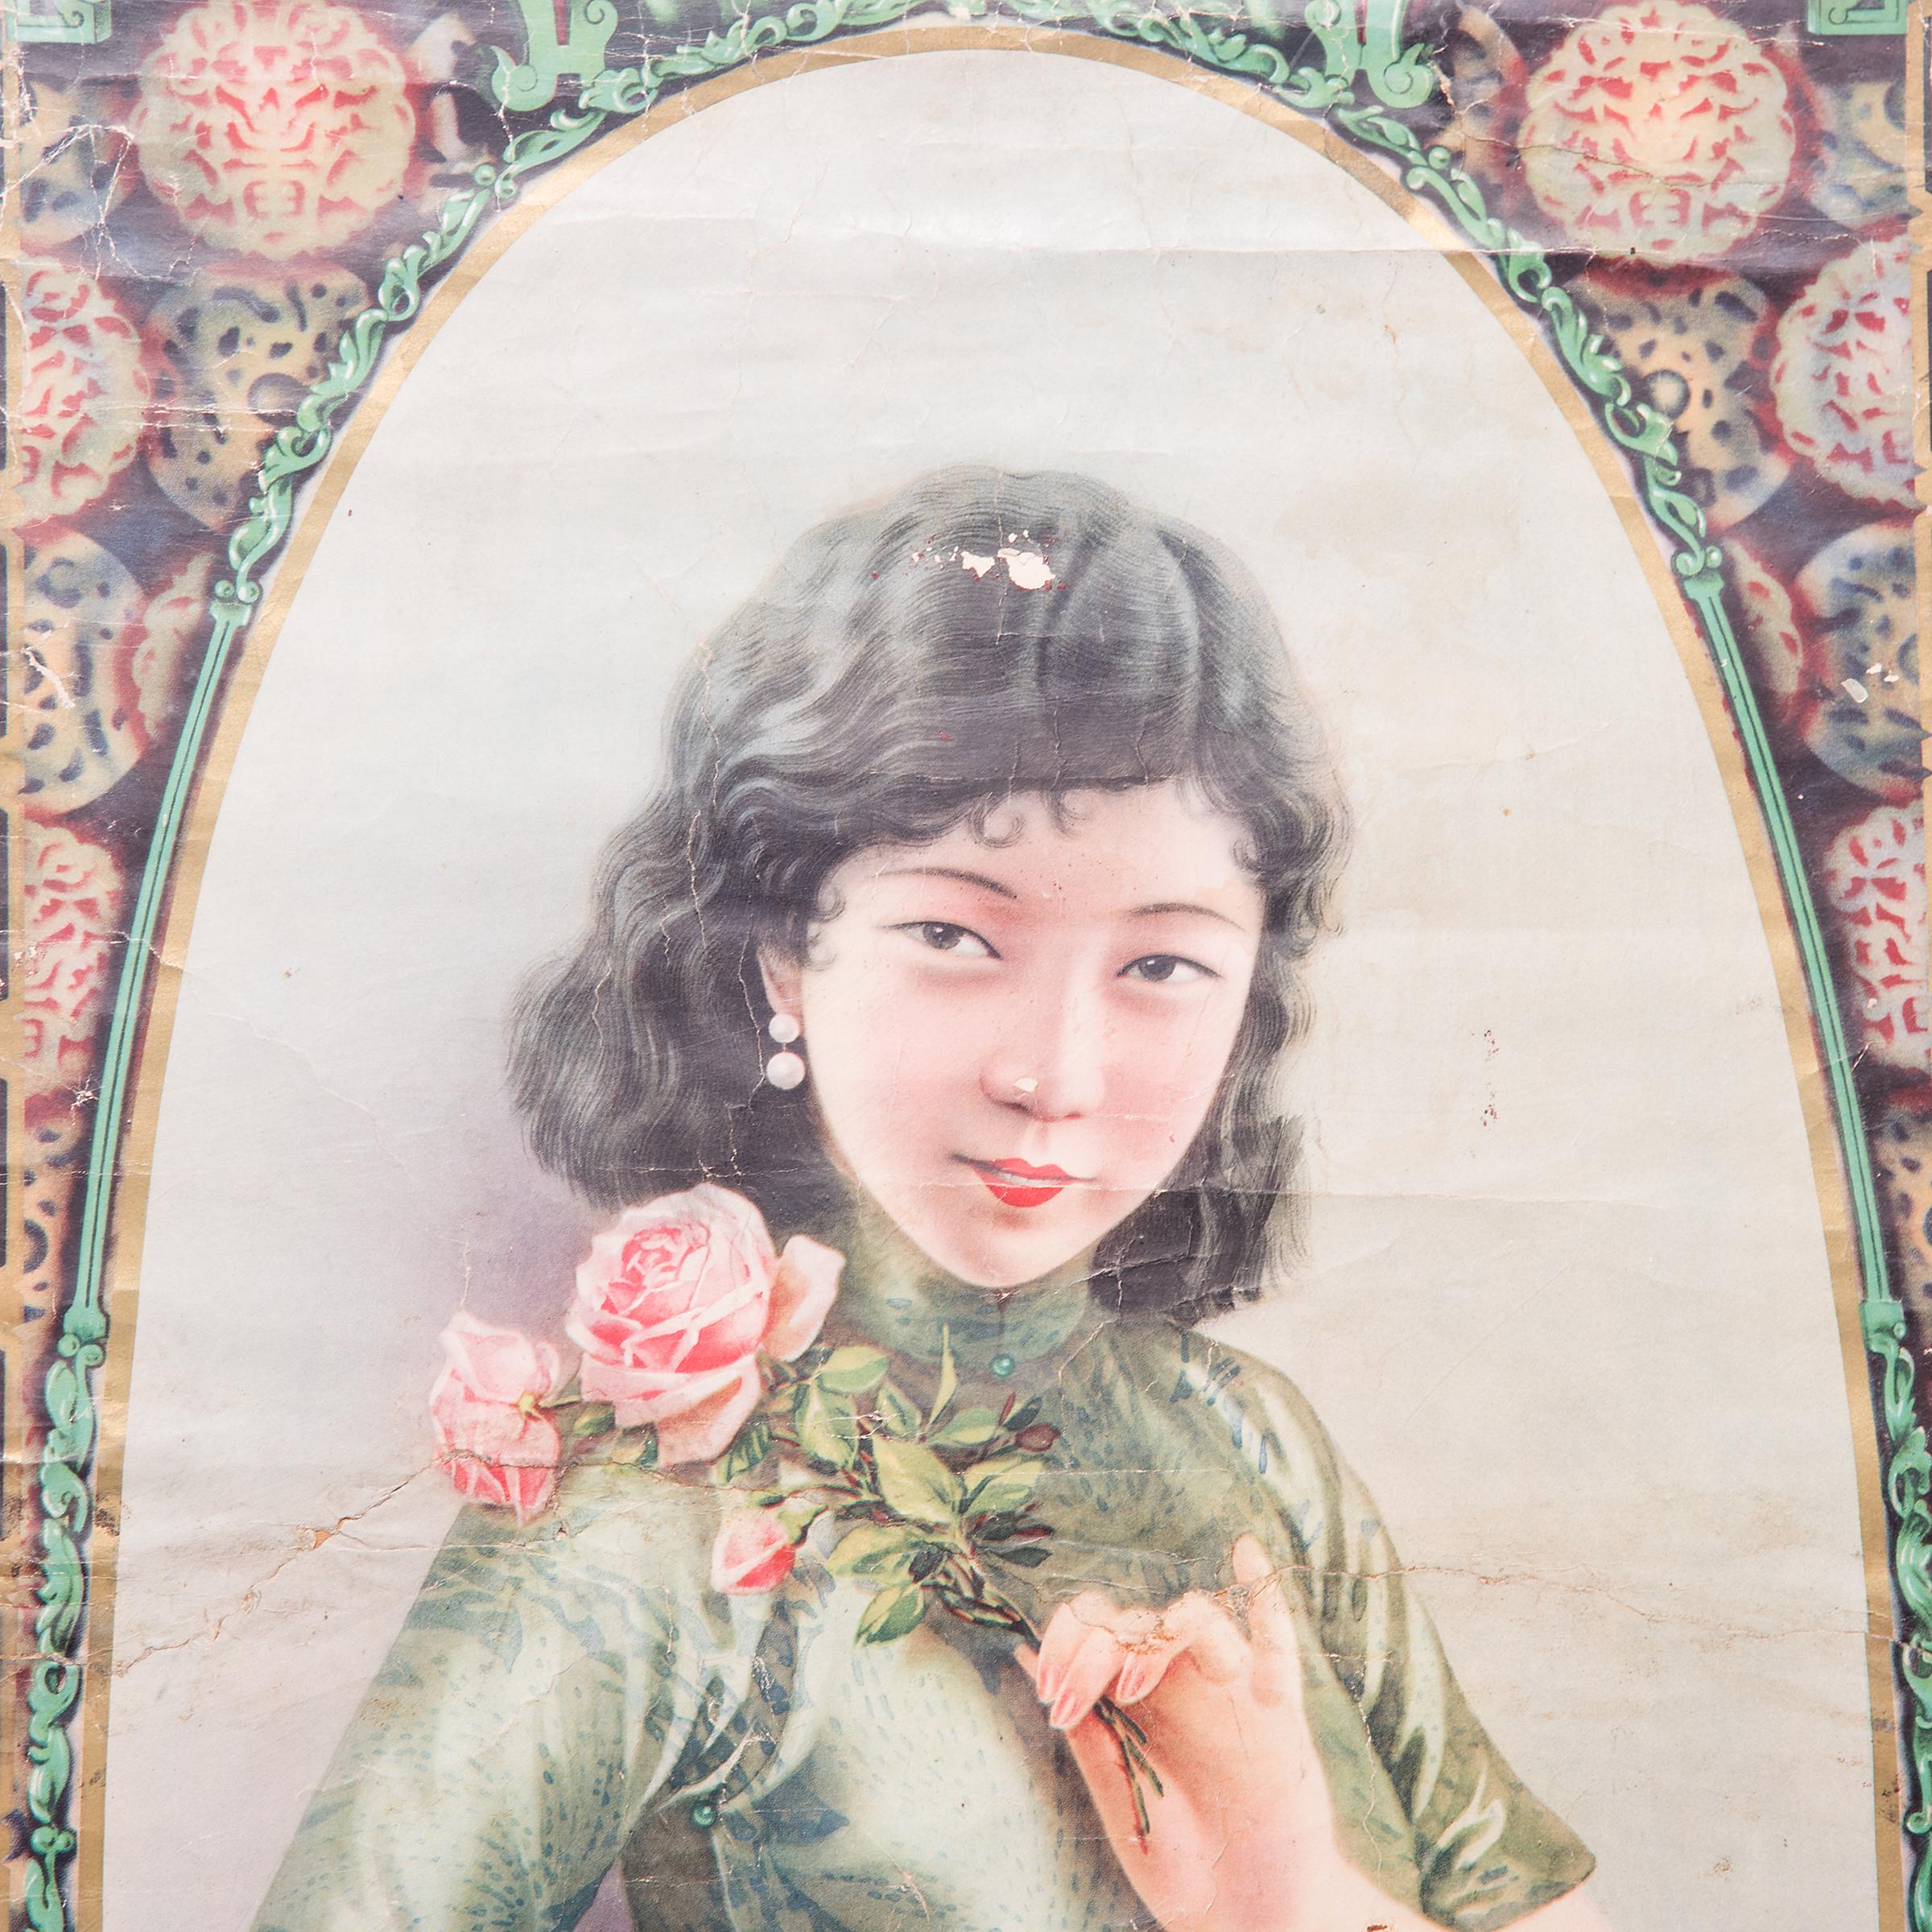 This 1930s poster melds the meticulous detail of traditional Chinese painting with the visual aesthetic of color lithography. In this alluring poster, a fresh-faced ingénue confronts us with a come-hither pose, inviting a sniff of the rose sprig she